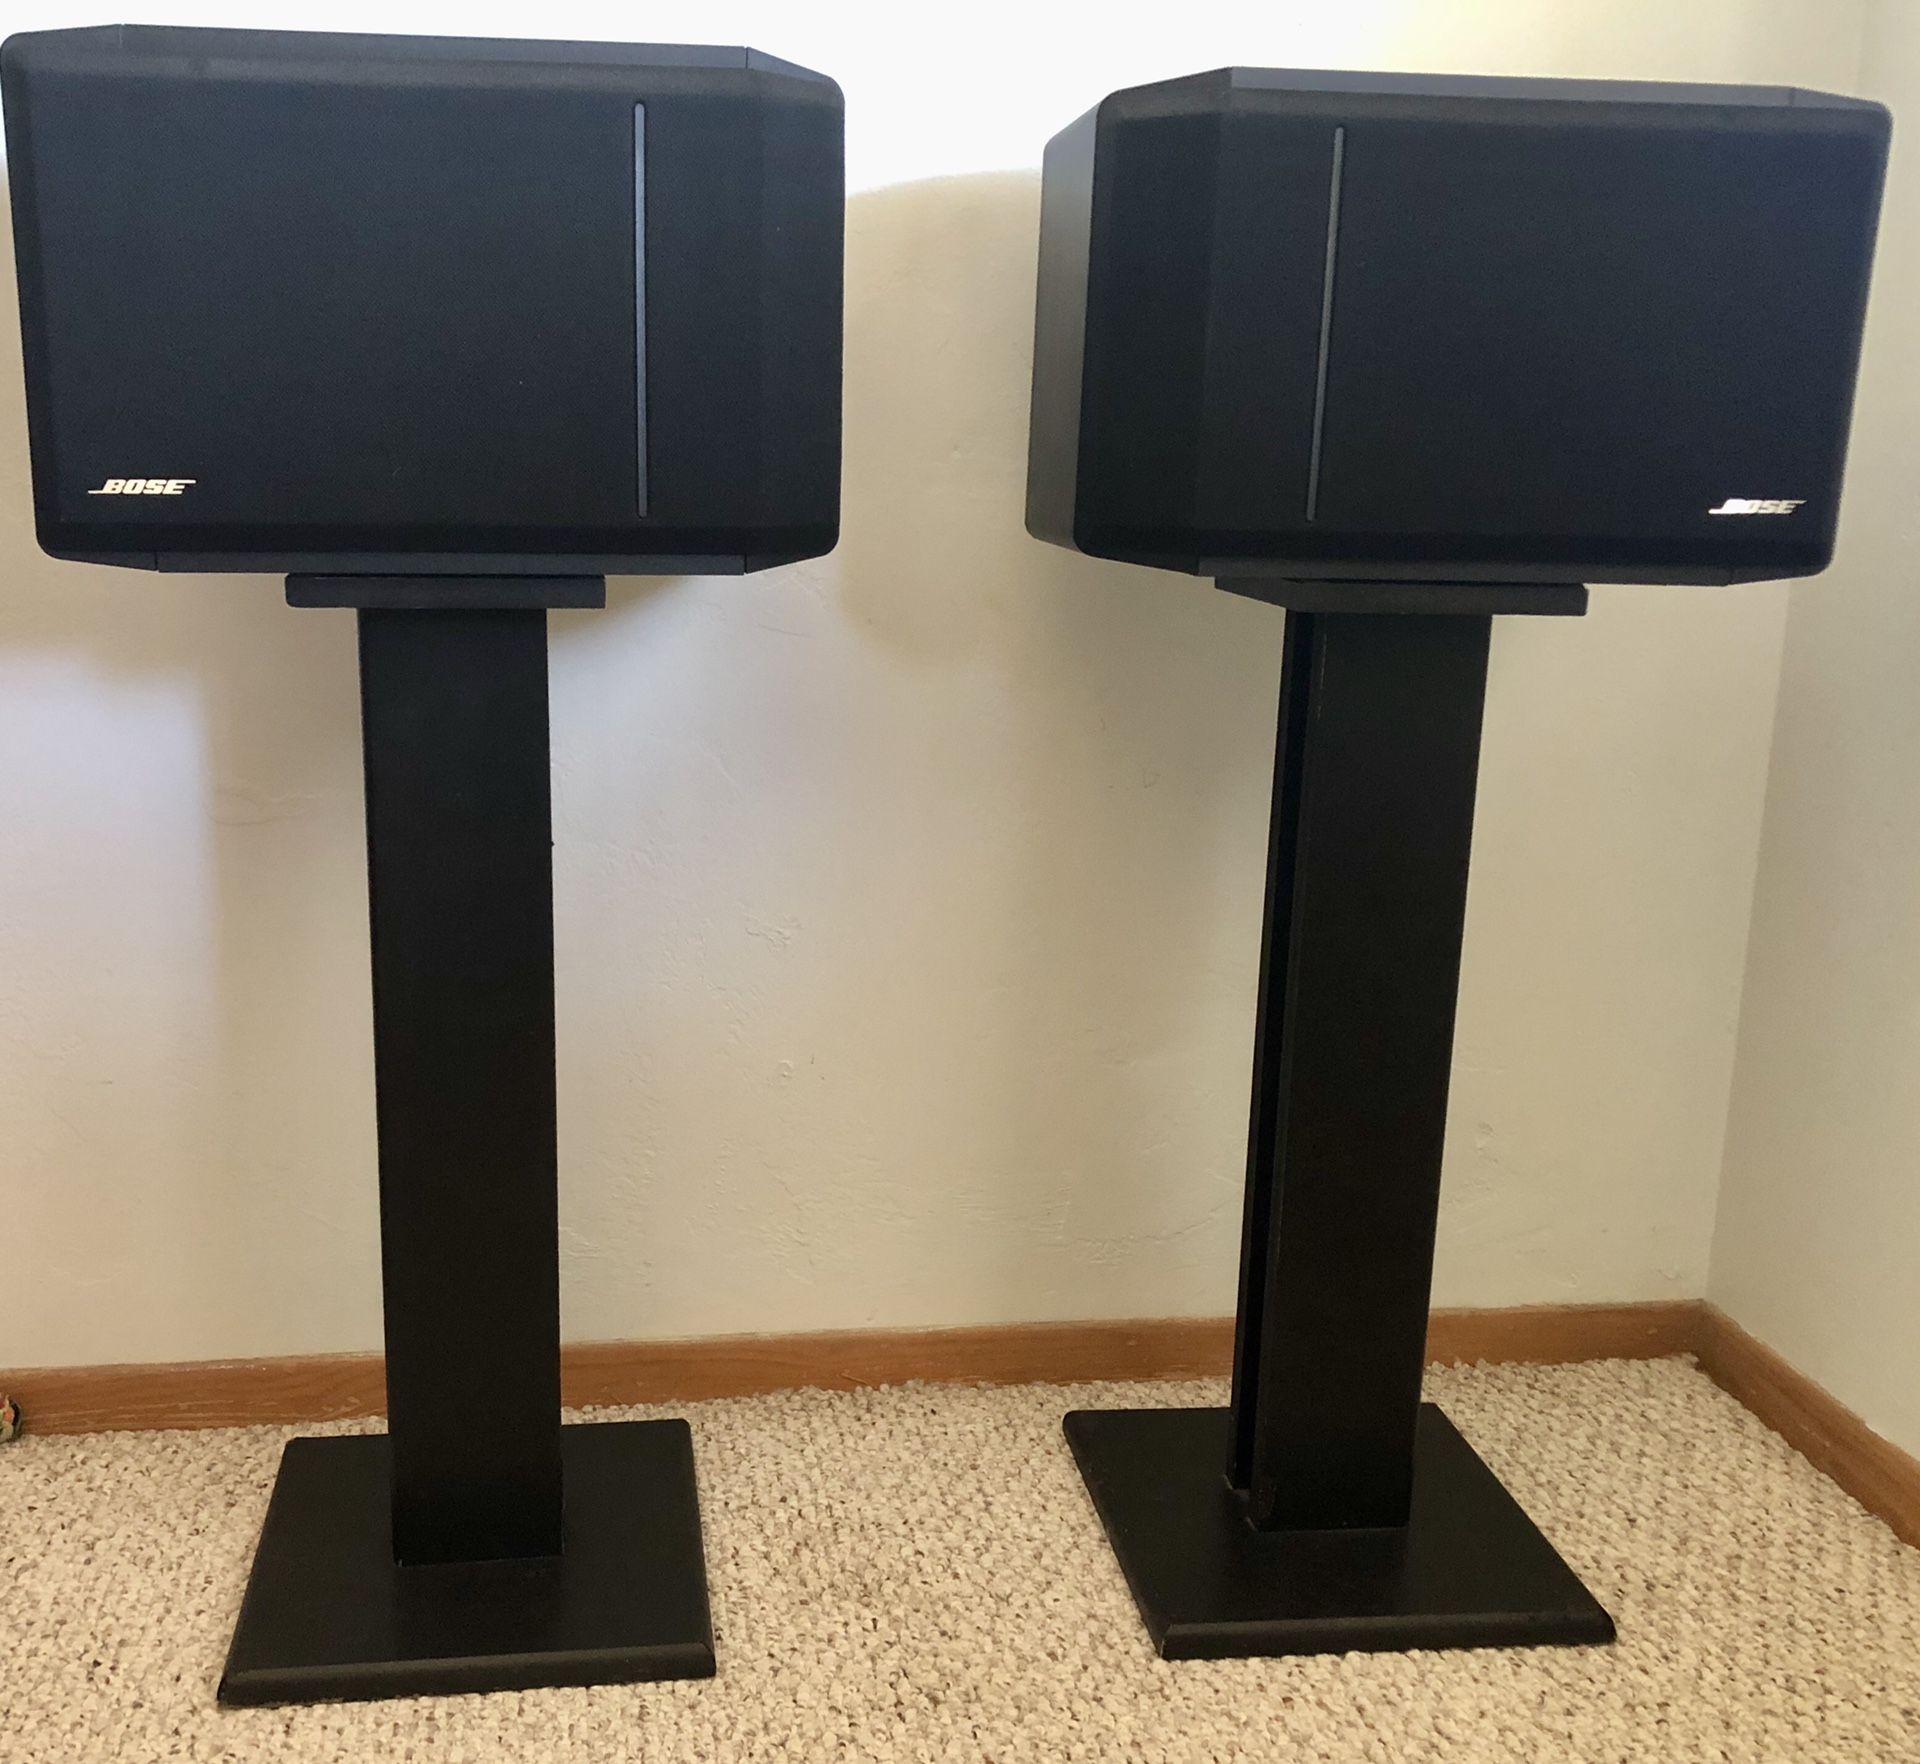 BOSE 201 Series IV Speakers with stands.